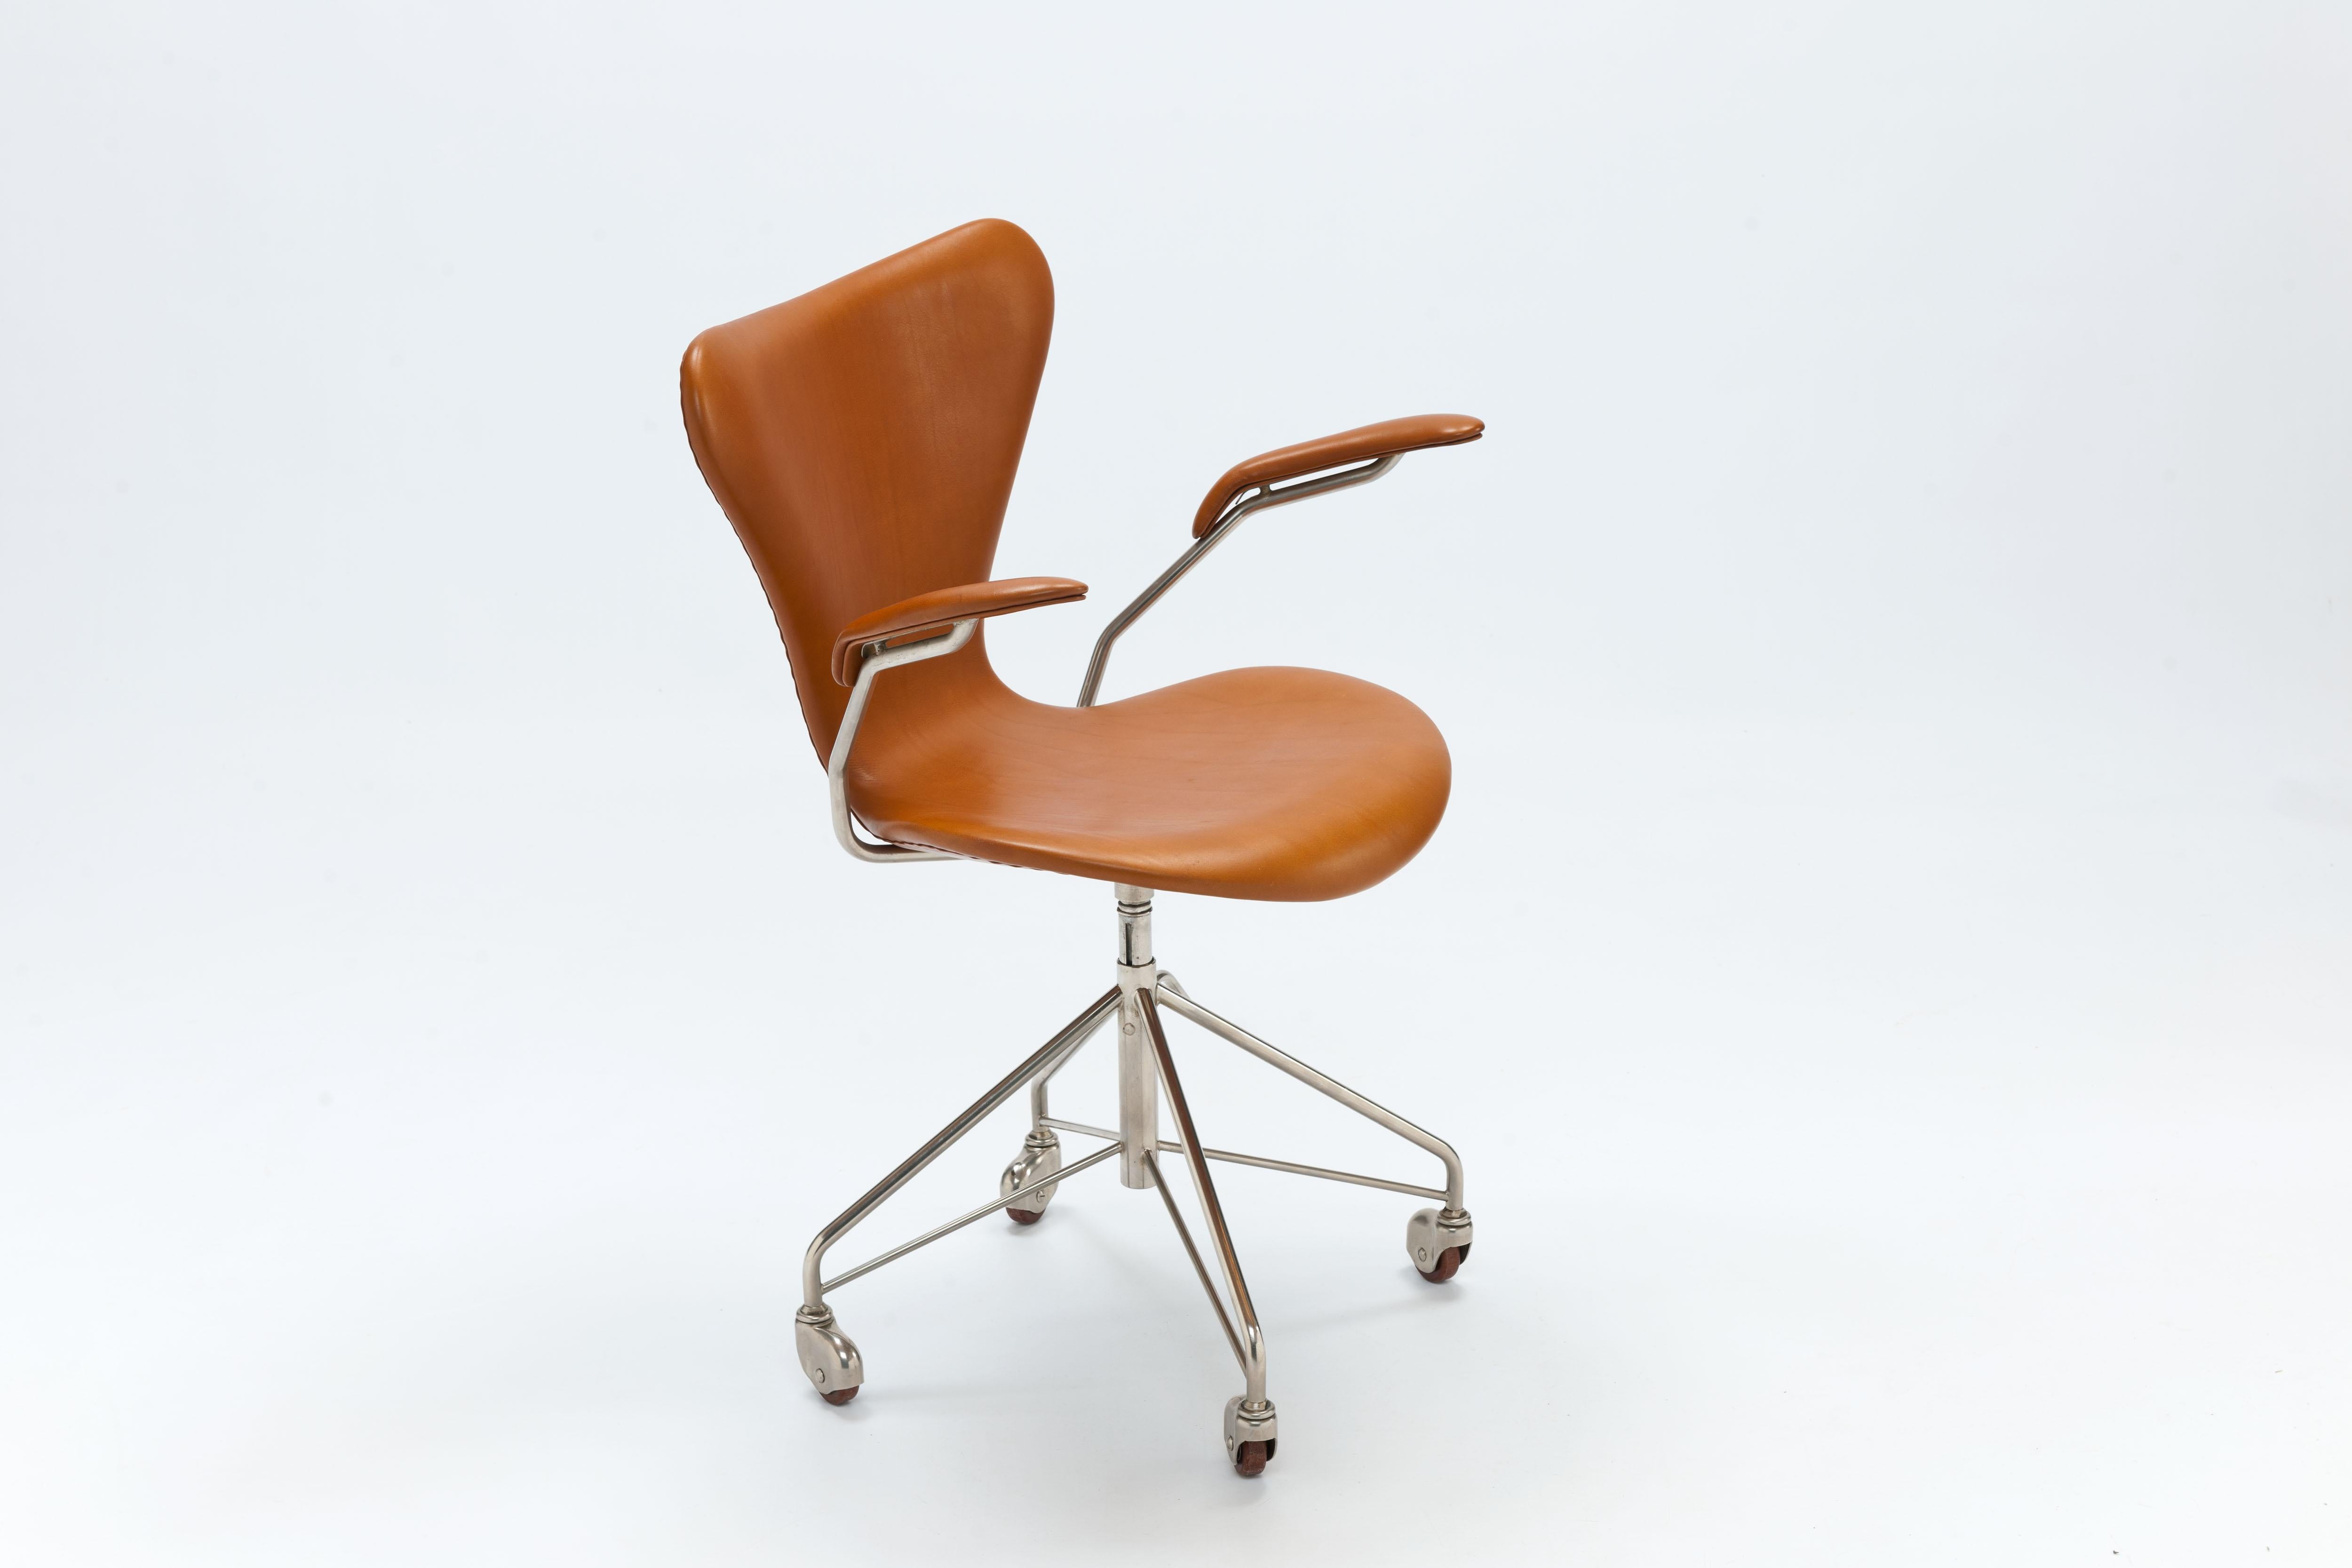 Arne Jacobsen swivel desk chair model 3217 office chair with armrests. Original, nickel finish first series four-star swivel base on casters. Designed by Arne Jacobsen in 1955.
This chair dates back to the first years of production indicated by the